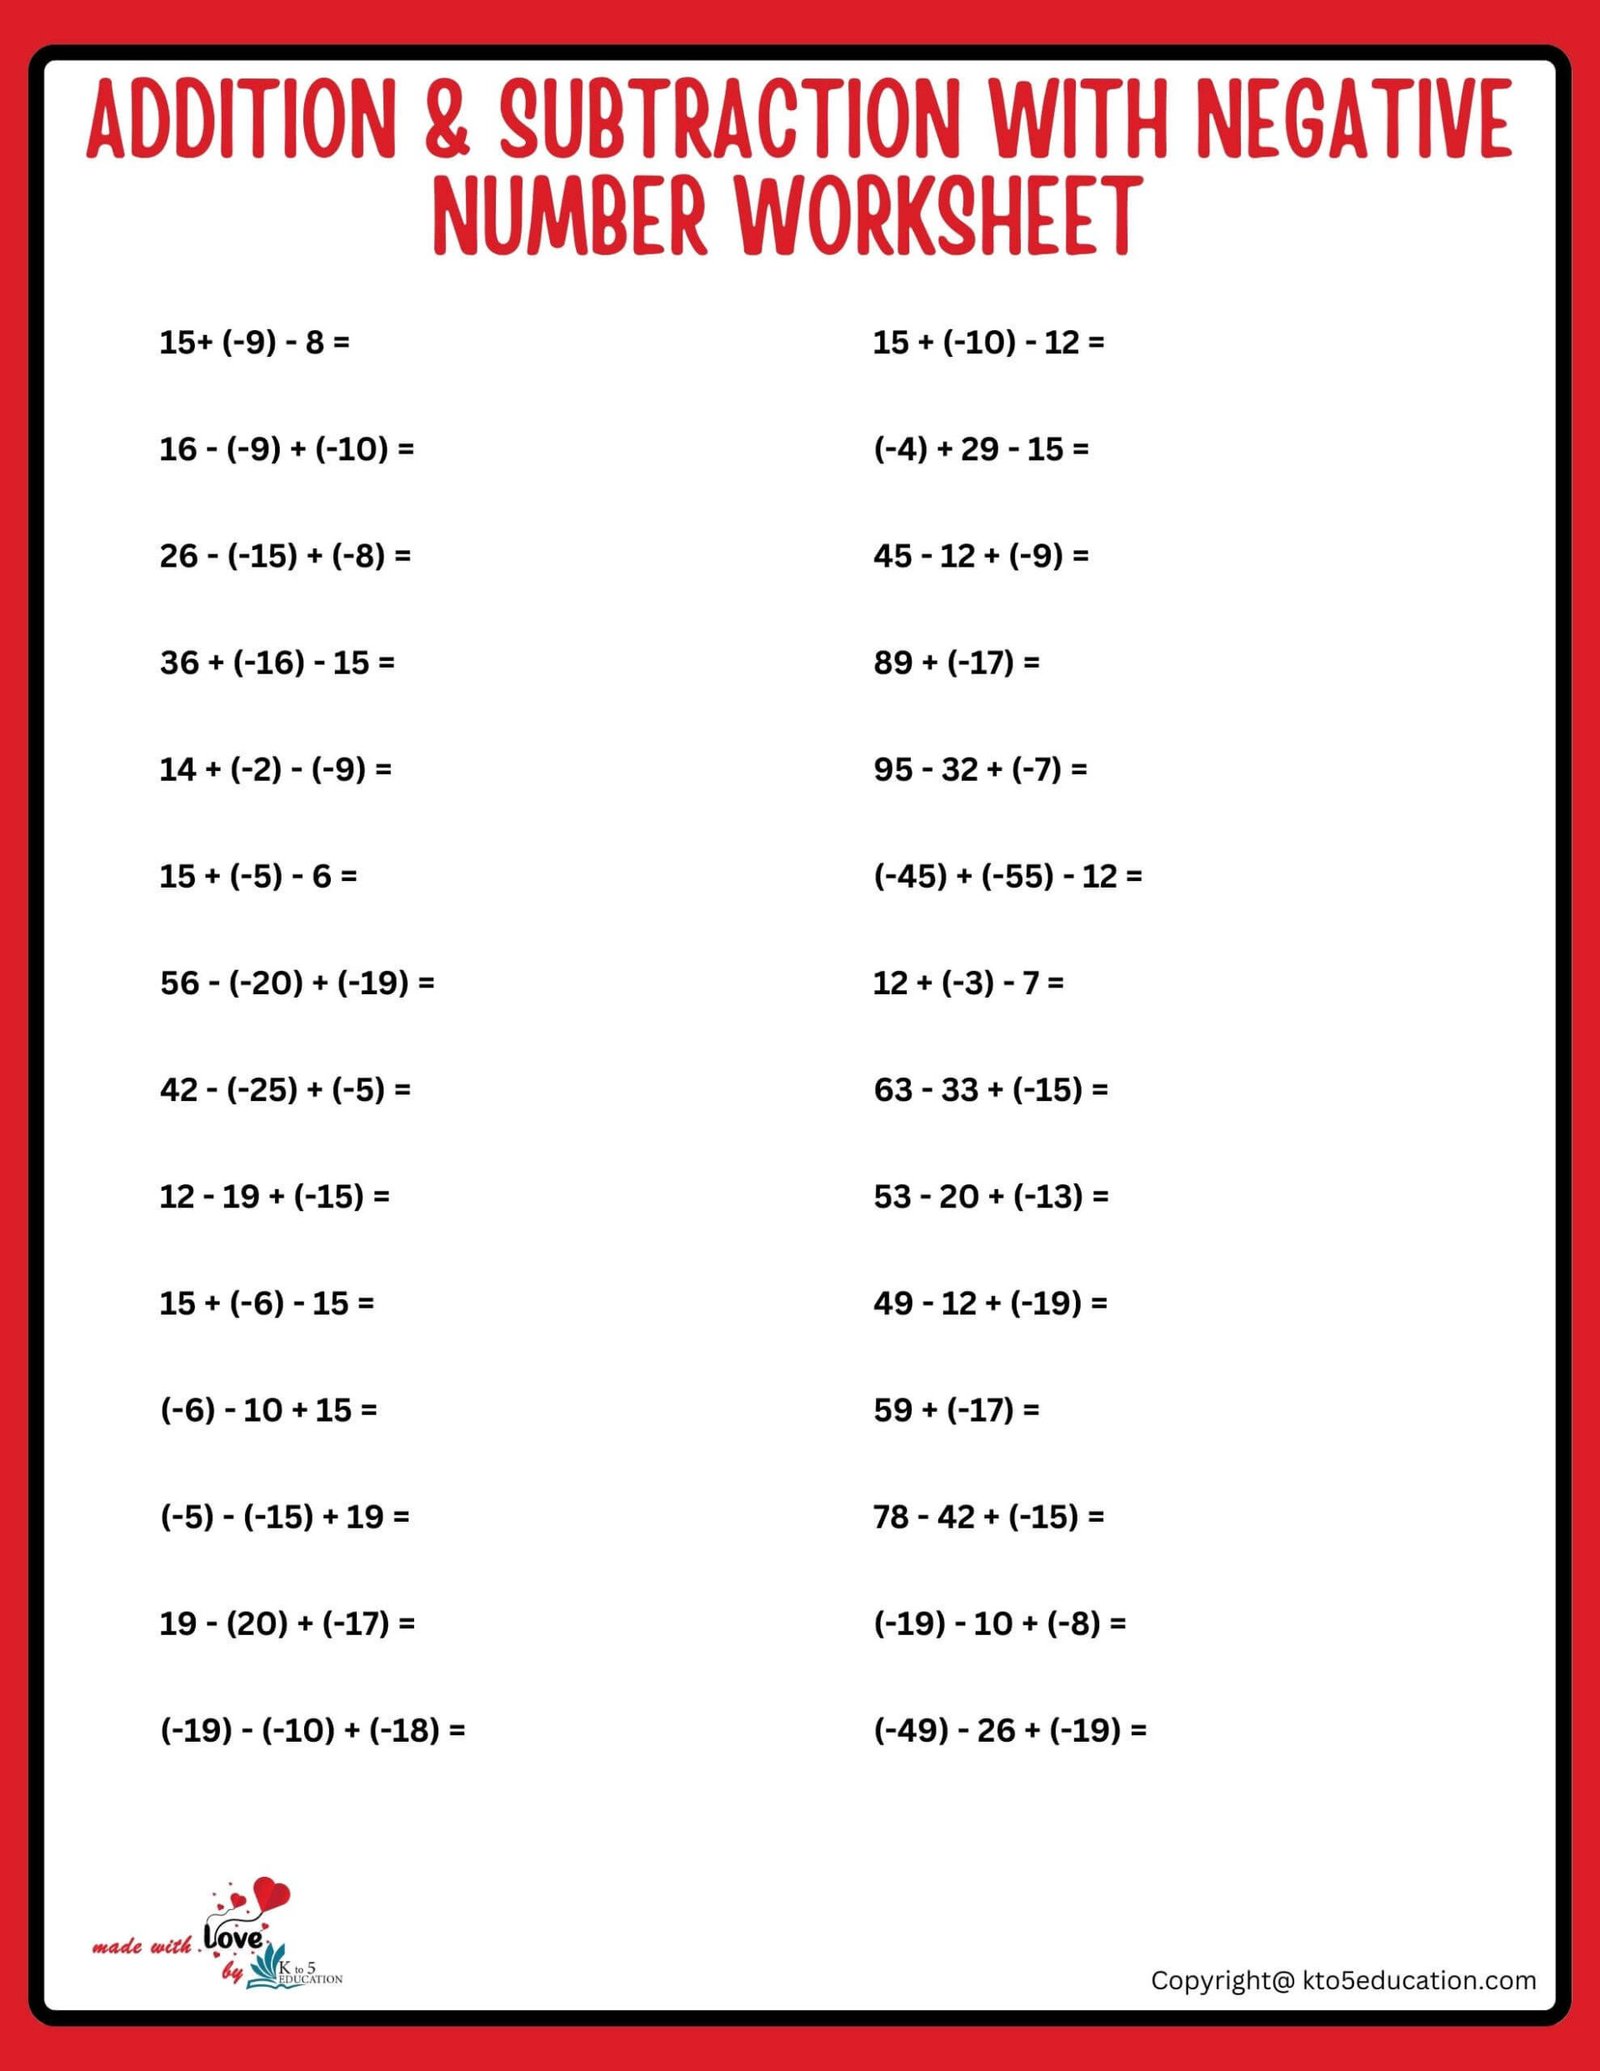 multiply-positive-and-negative-numbers-worksheet